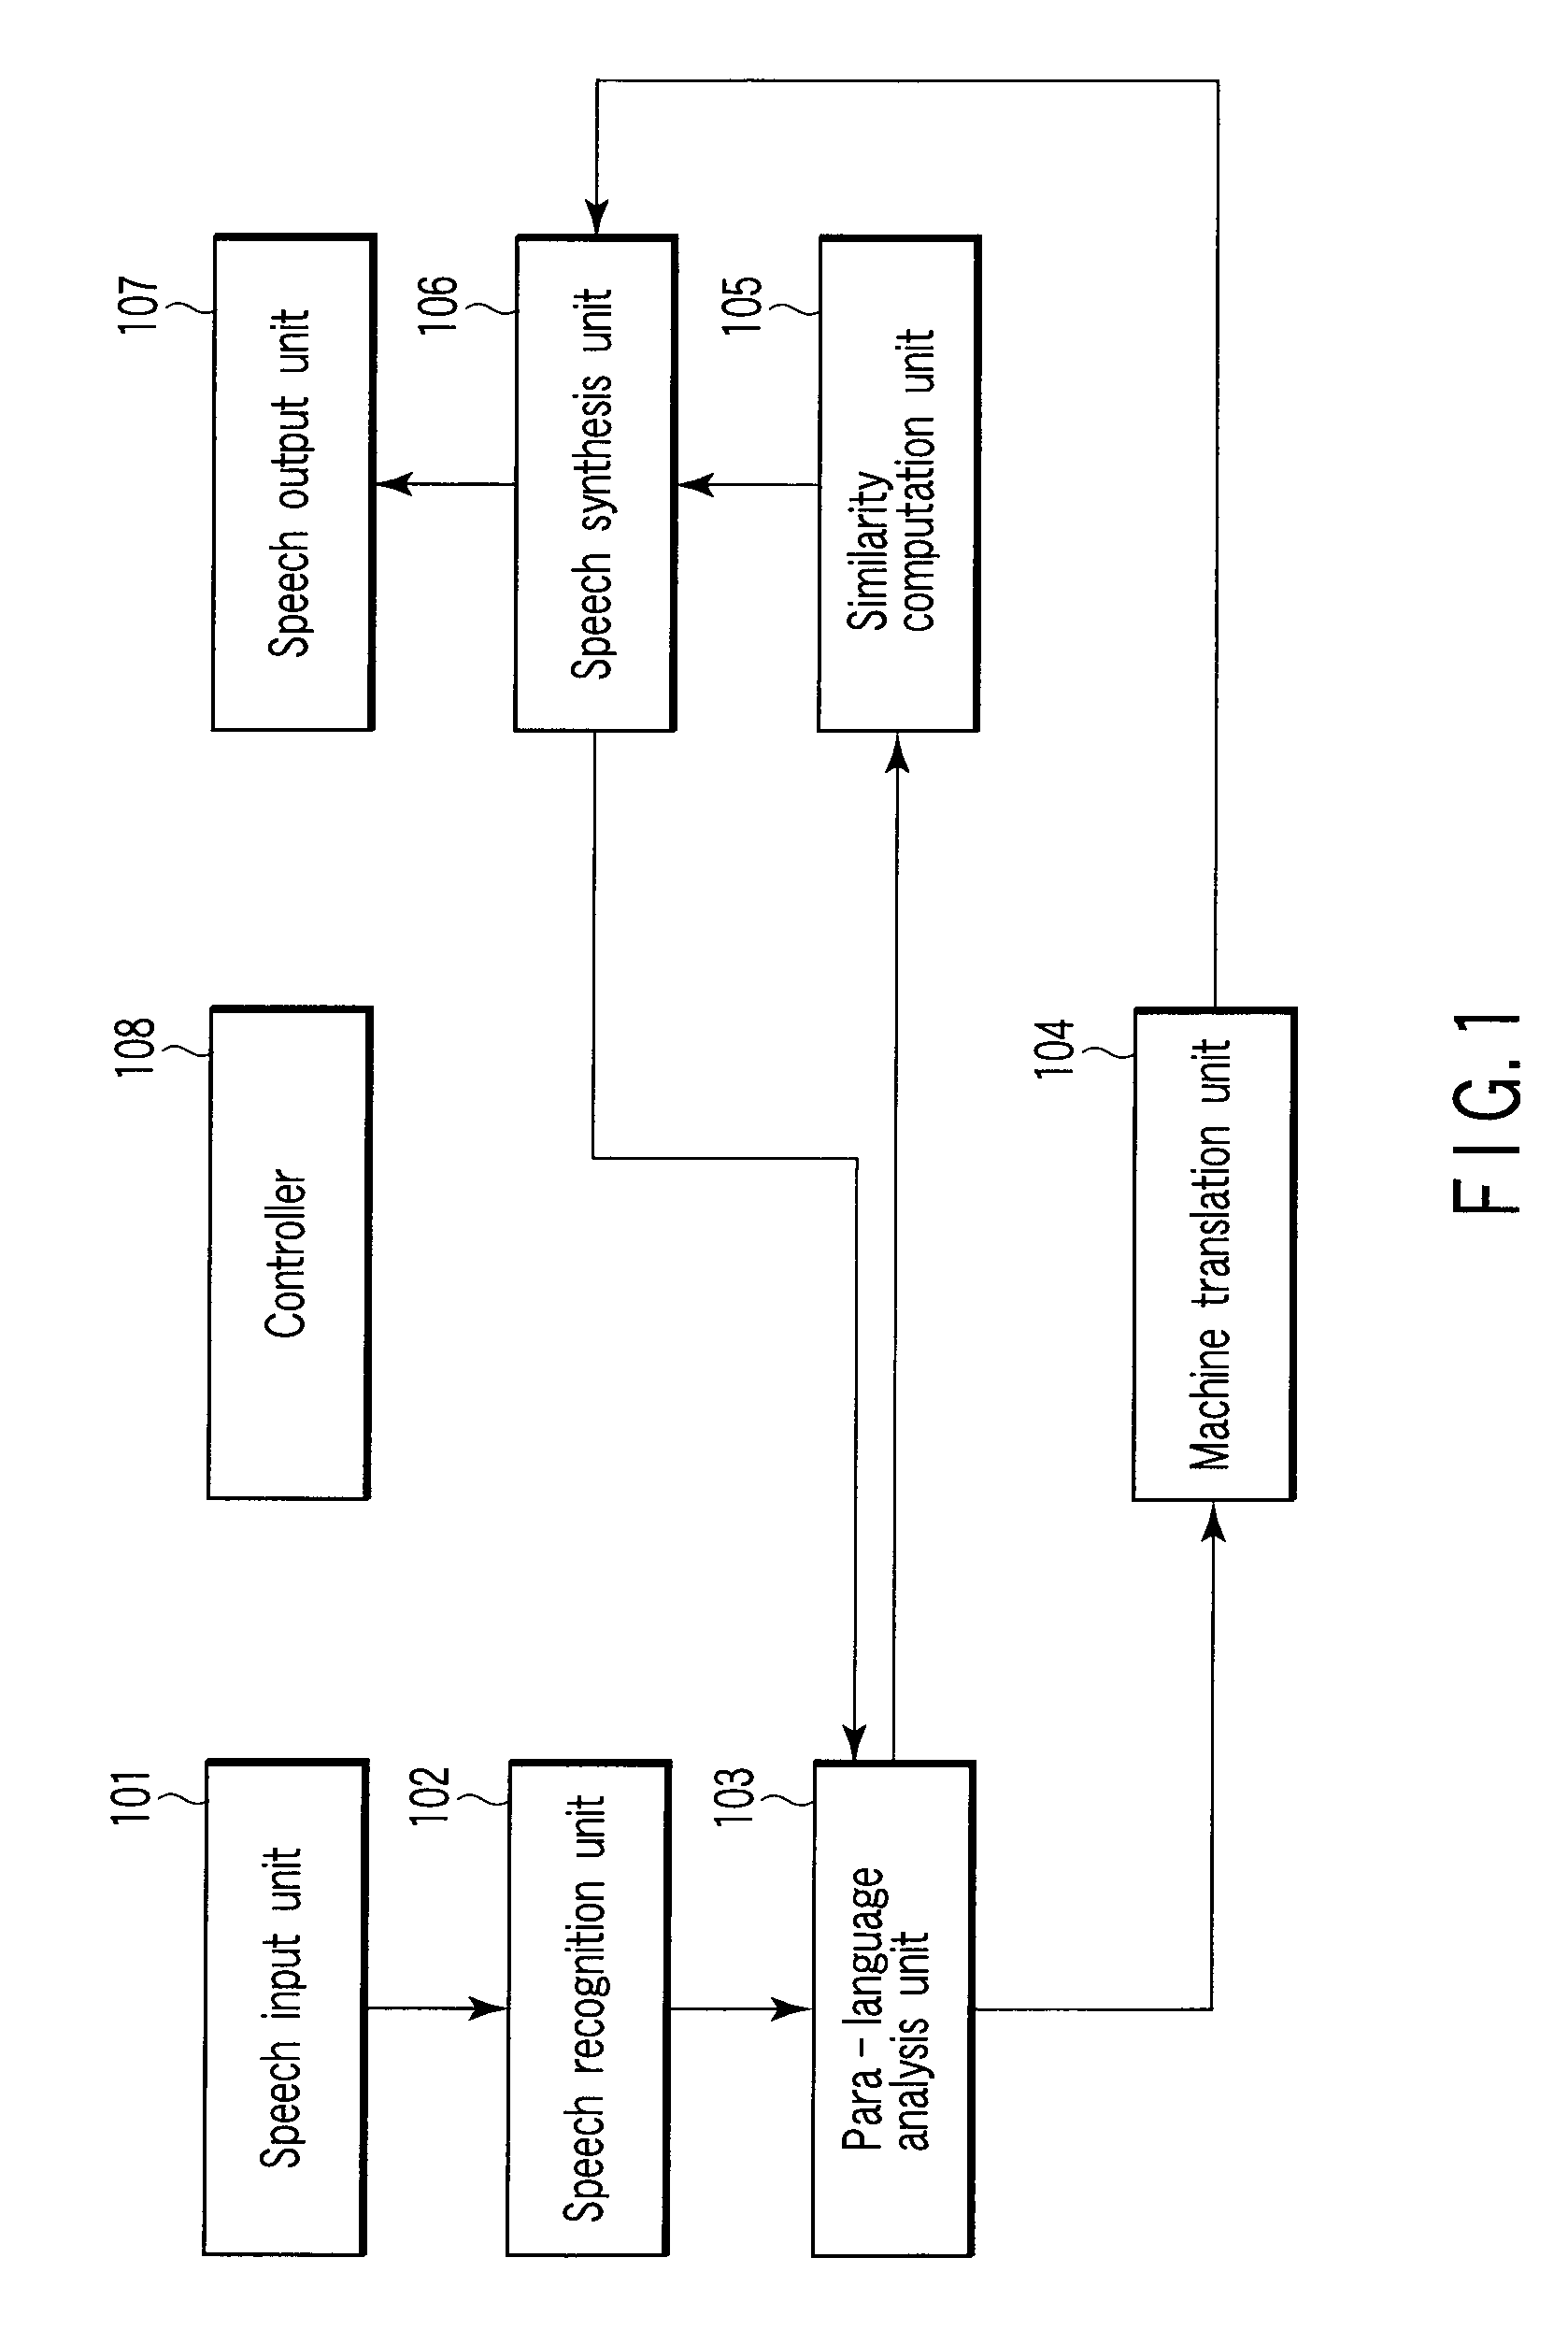 Speech translation apparatus, method and computer readable medium for receiving a spoken language and translating to an equivalent target language